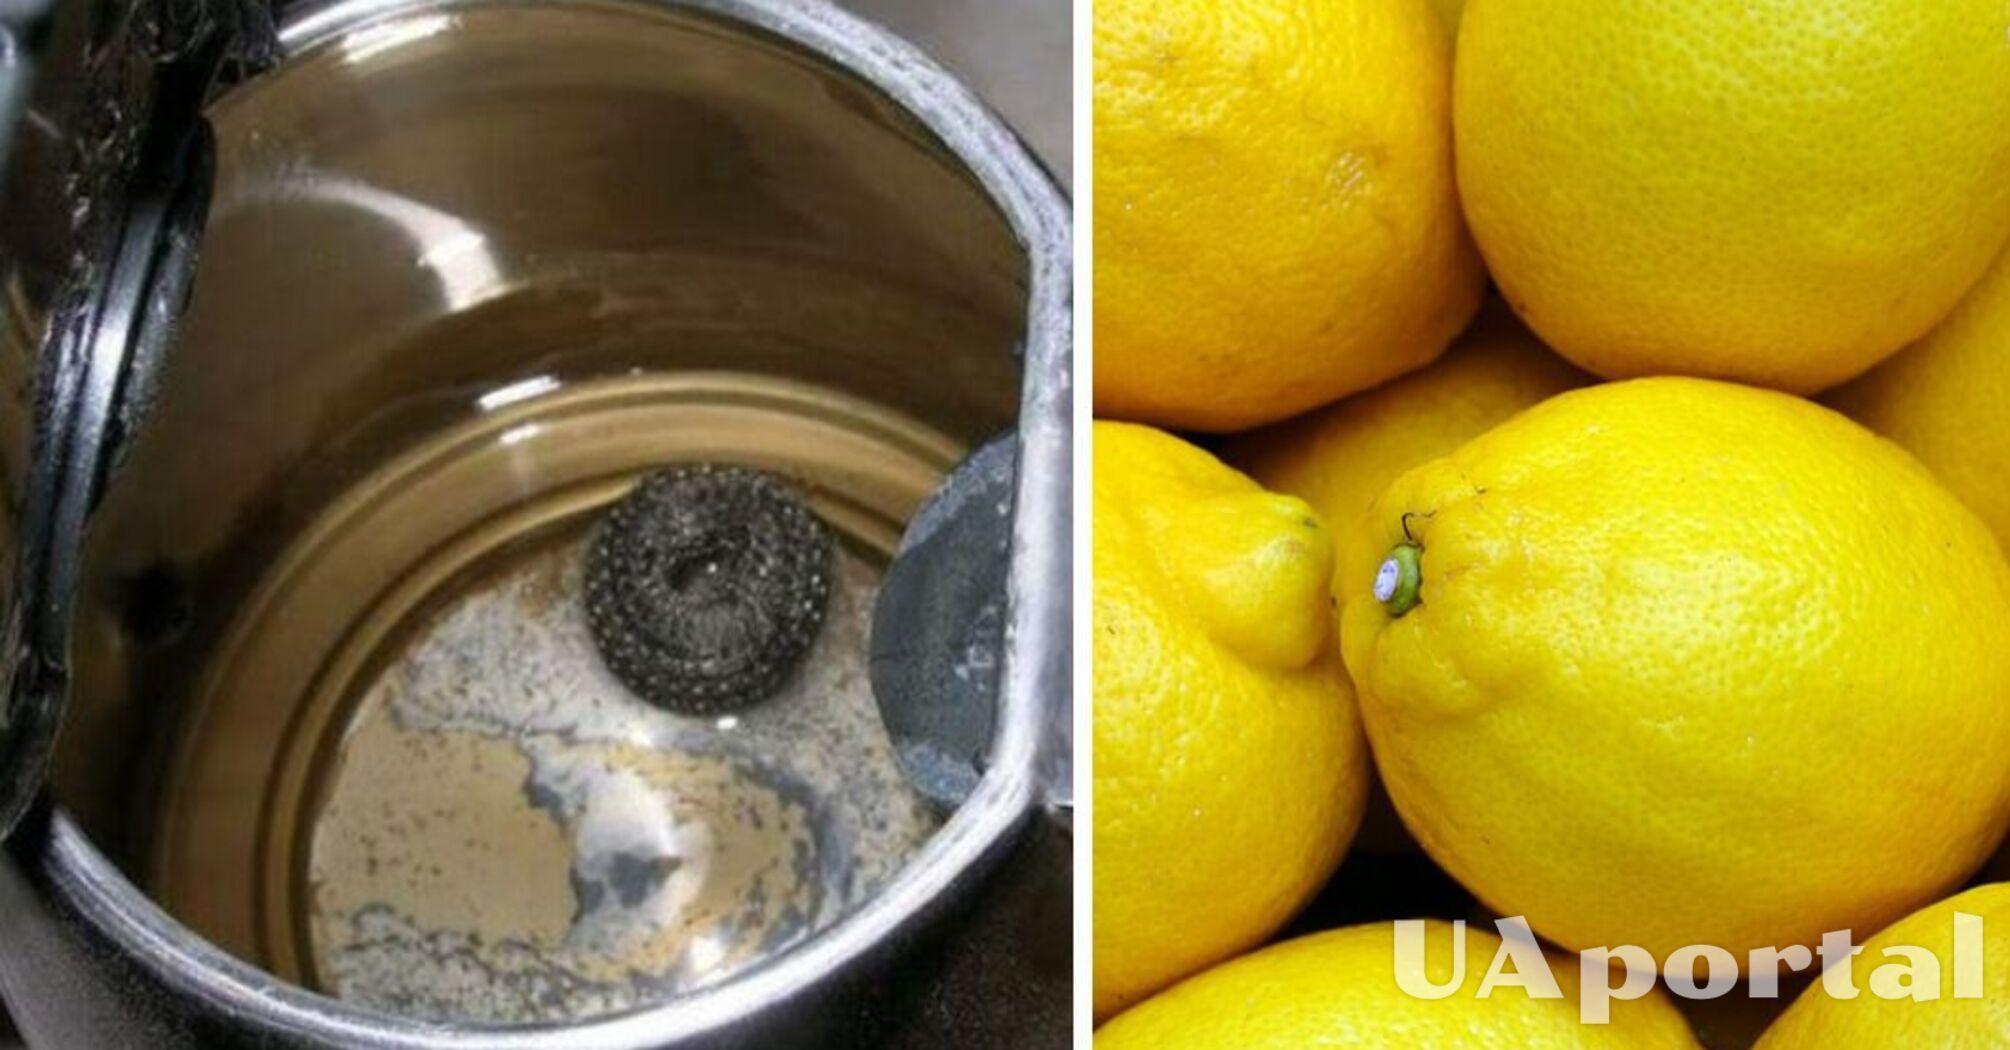 Experts explain how to descale a kettle without vinegar: a cheap and effective option